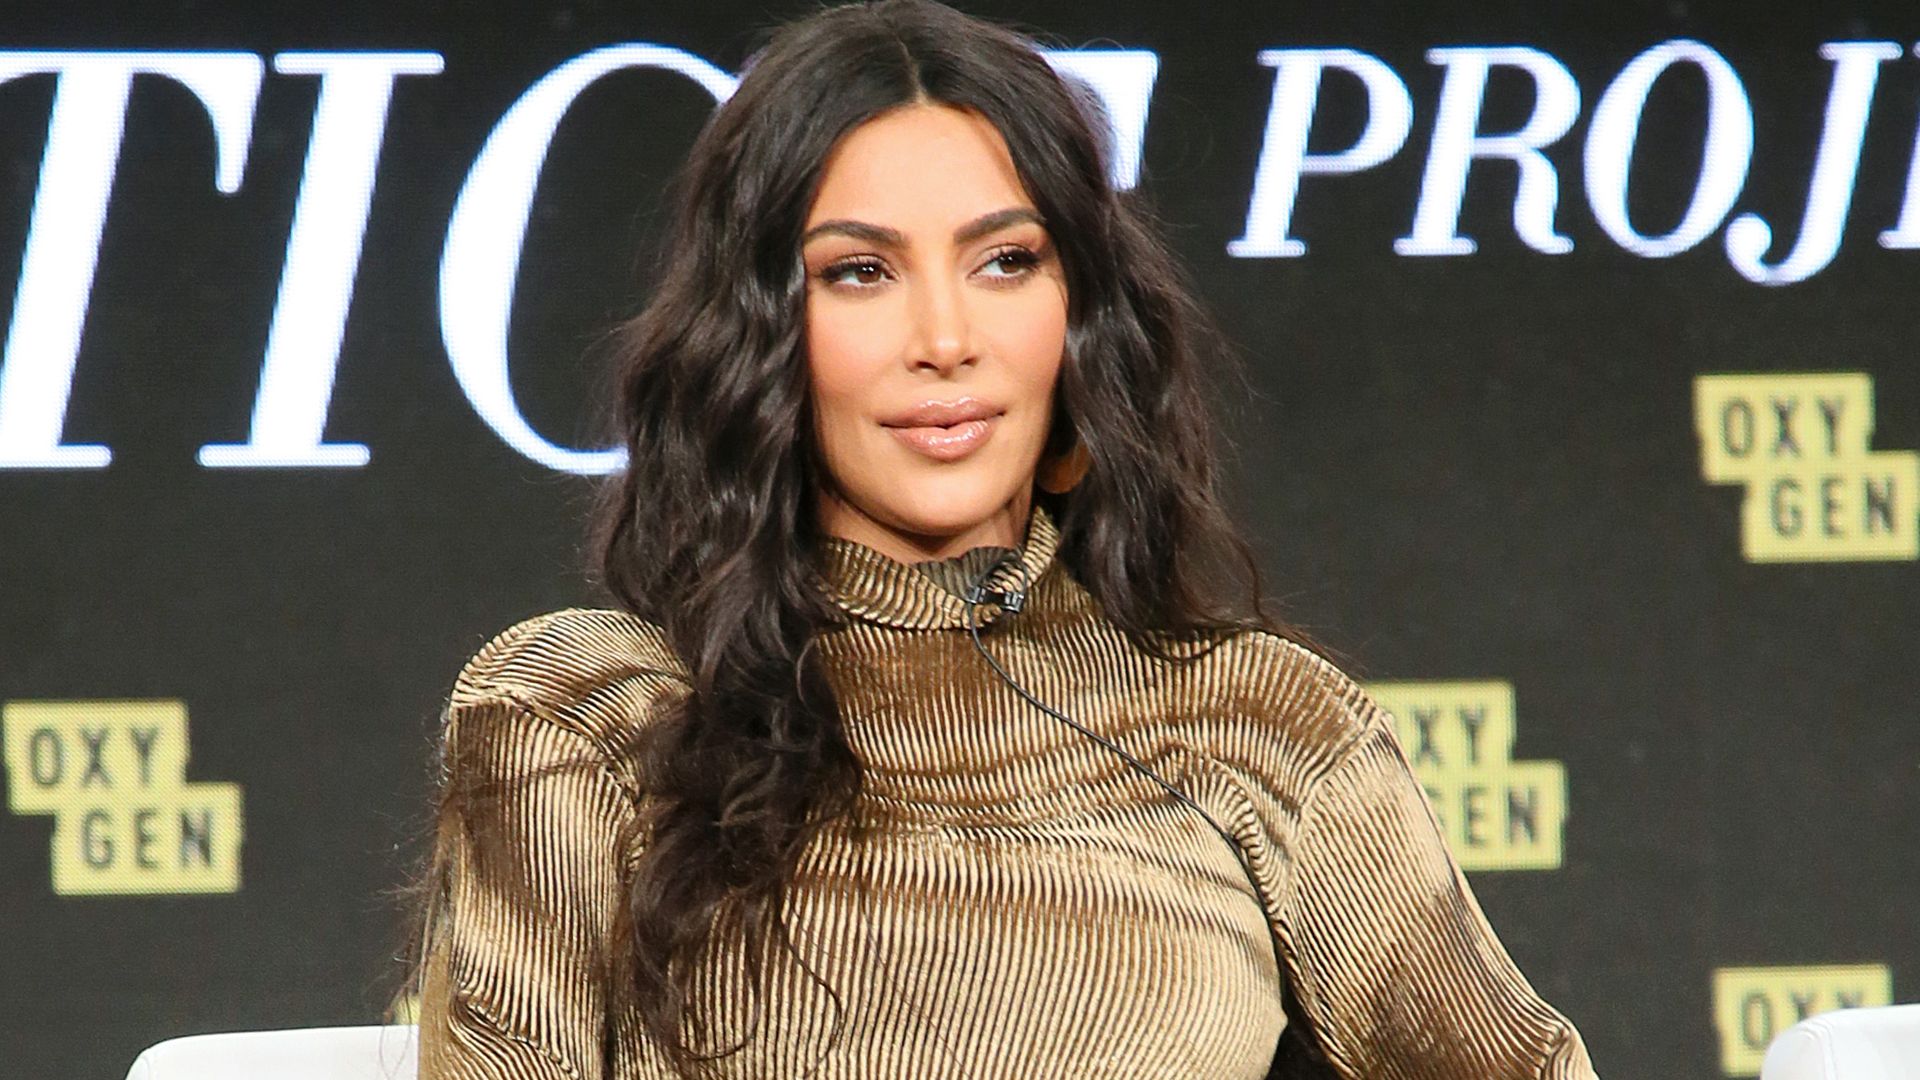 Kim Kardashian sat on stage for a 'The Justice Project' documentarypress conference